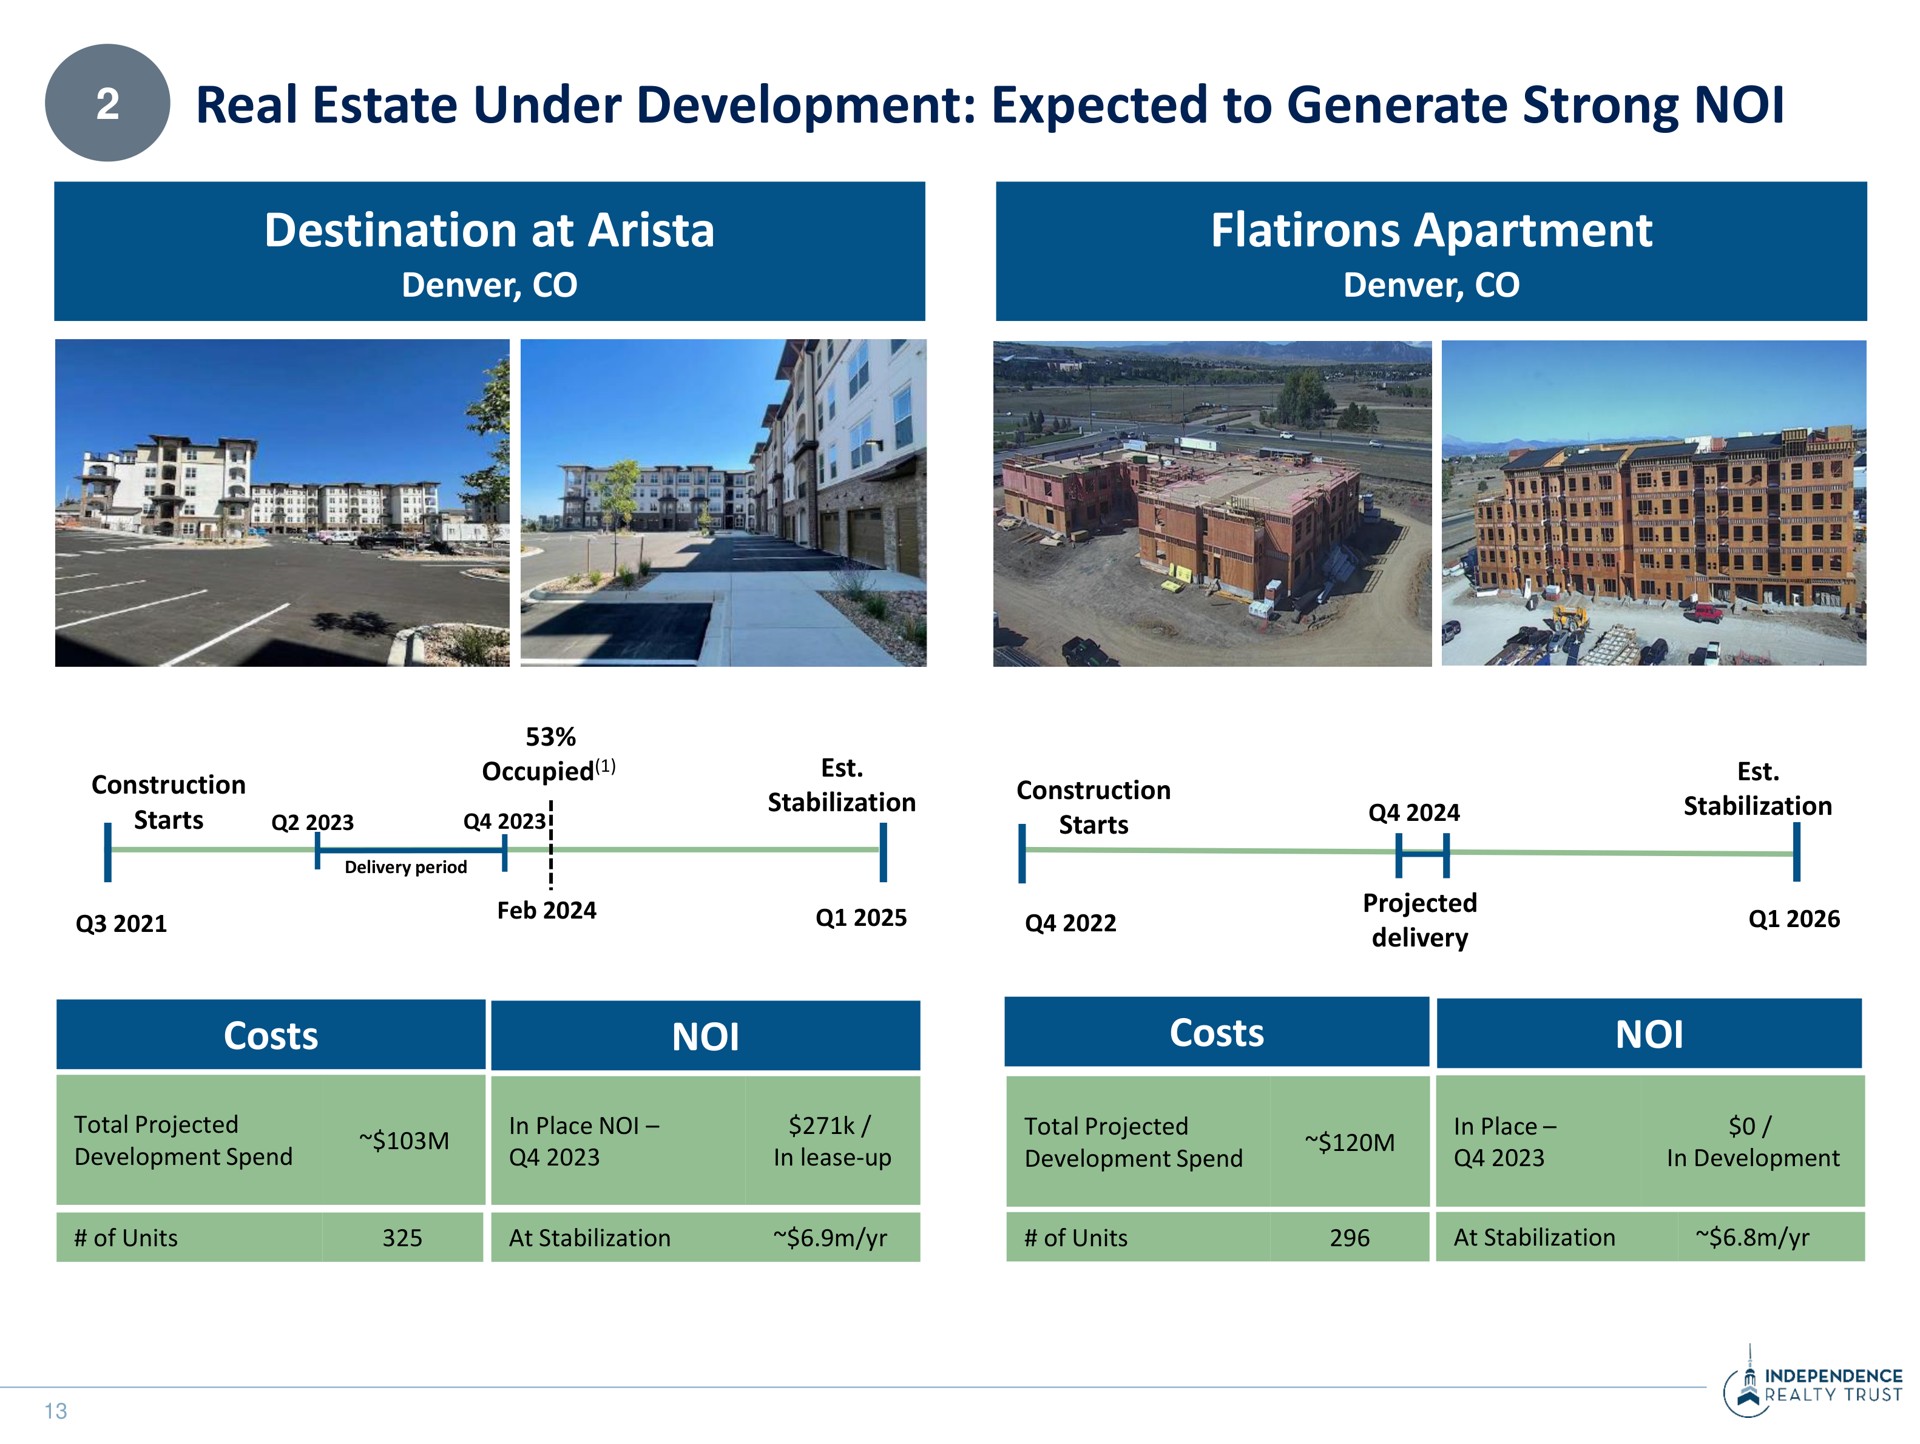 real estate under development expected to generate strong destination at arista flatirons apartment costs costs | Independence Realty Trust